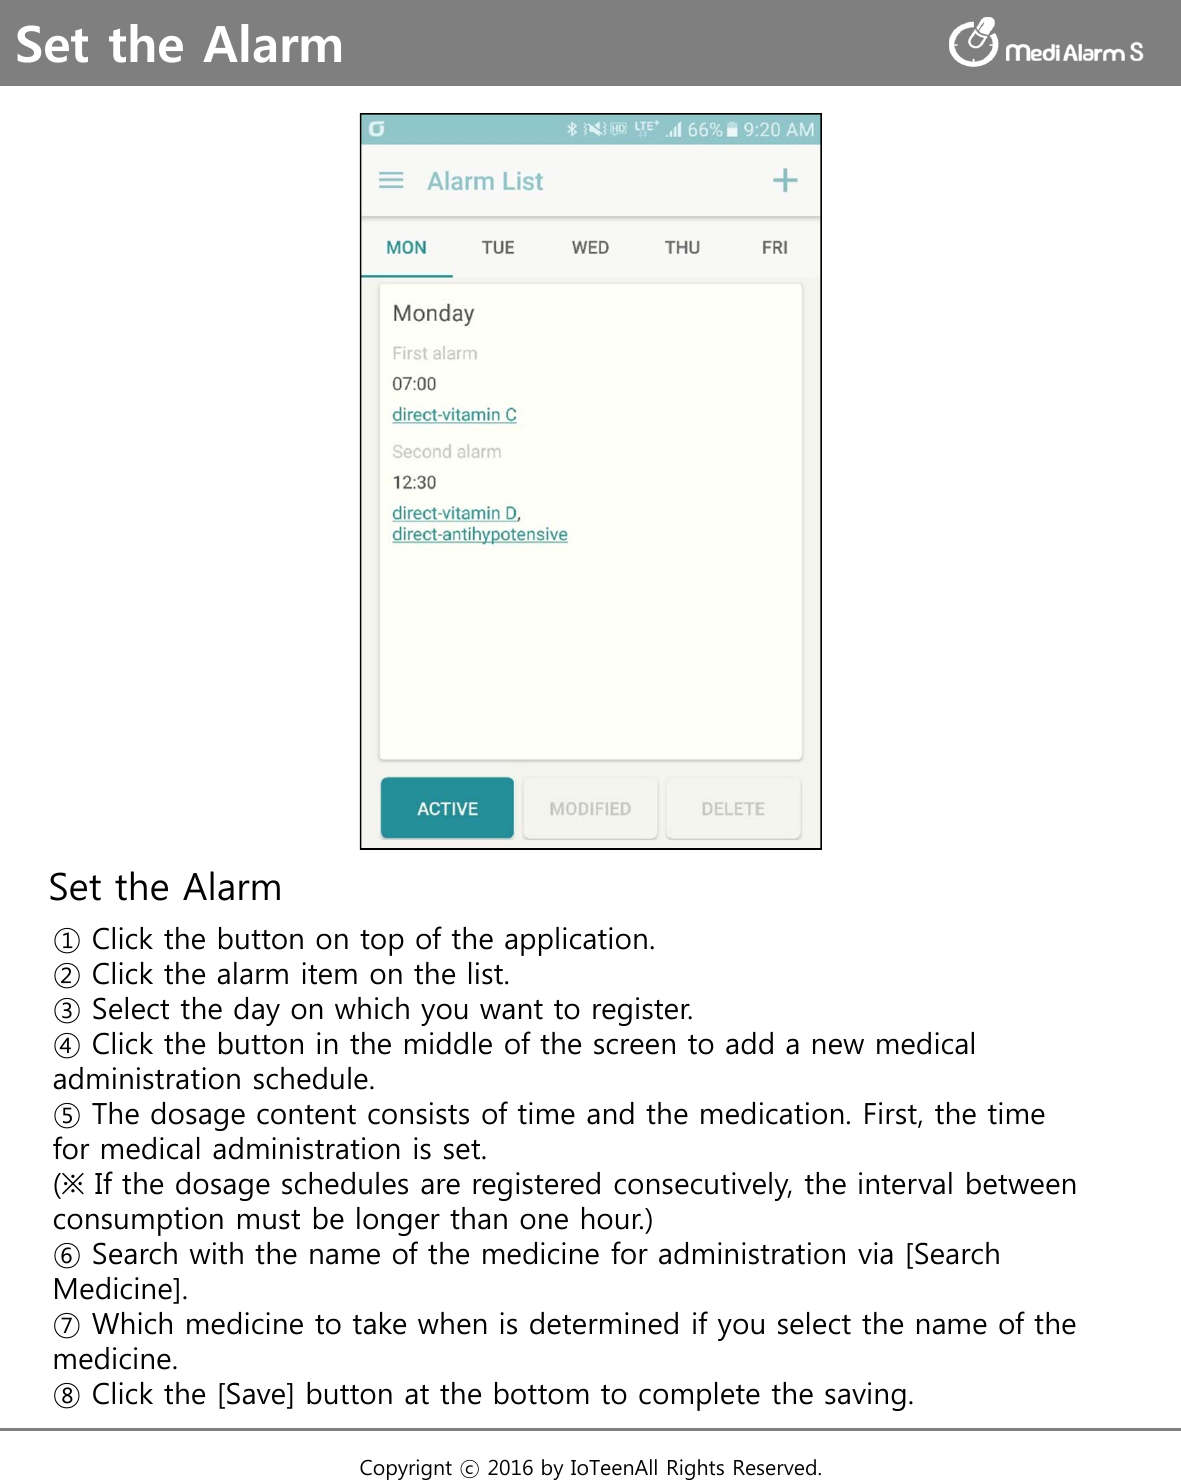 Set the Alarm① Click the button on top of the application.② Click the alarm item on the list.③ Select the day on which you want to register.④ Click the button in the middle of the screen to add a new medical administration schedule.⑤ The dosage content consists of time and the medication. First, the time for medical administration is set. (※ If the dosage schedules are registered consecutively, the interval between consumption must be longer than one hour.)⑥ Search with the name of the medicine for administration via [Search Medicine].⑦ Which medicine to take when is determined if you select the name of the medicine.⑧ Click the [Save] button at the bottom to complete the saving.Set the AlarmCopyrignt ⓒ 2016 by IoTeenAll Rights Reserved. 